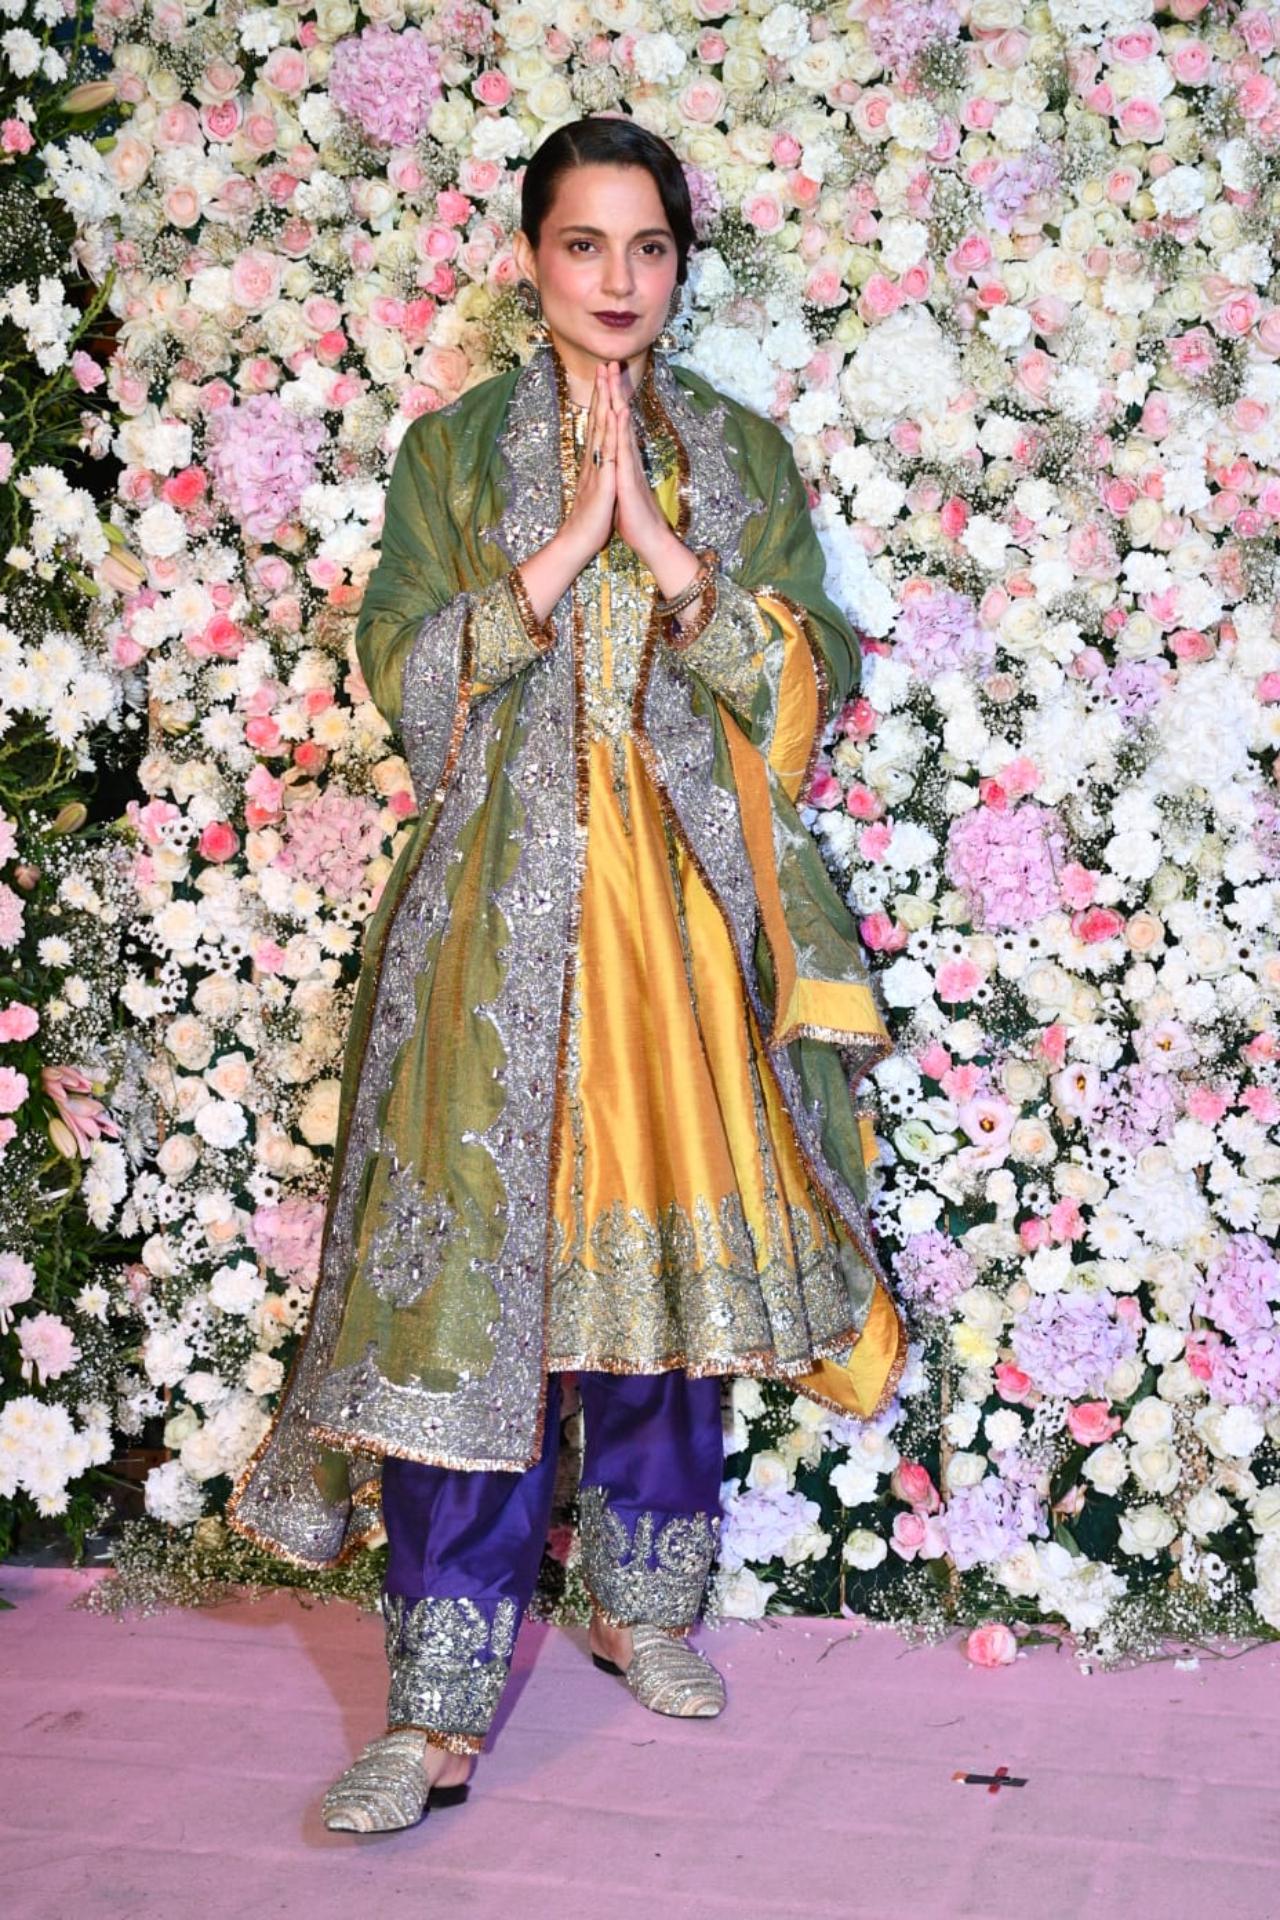 Kangana Ranaut opted for a yellow and violet traditional wear for the party